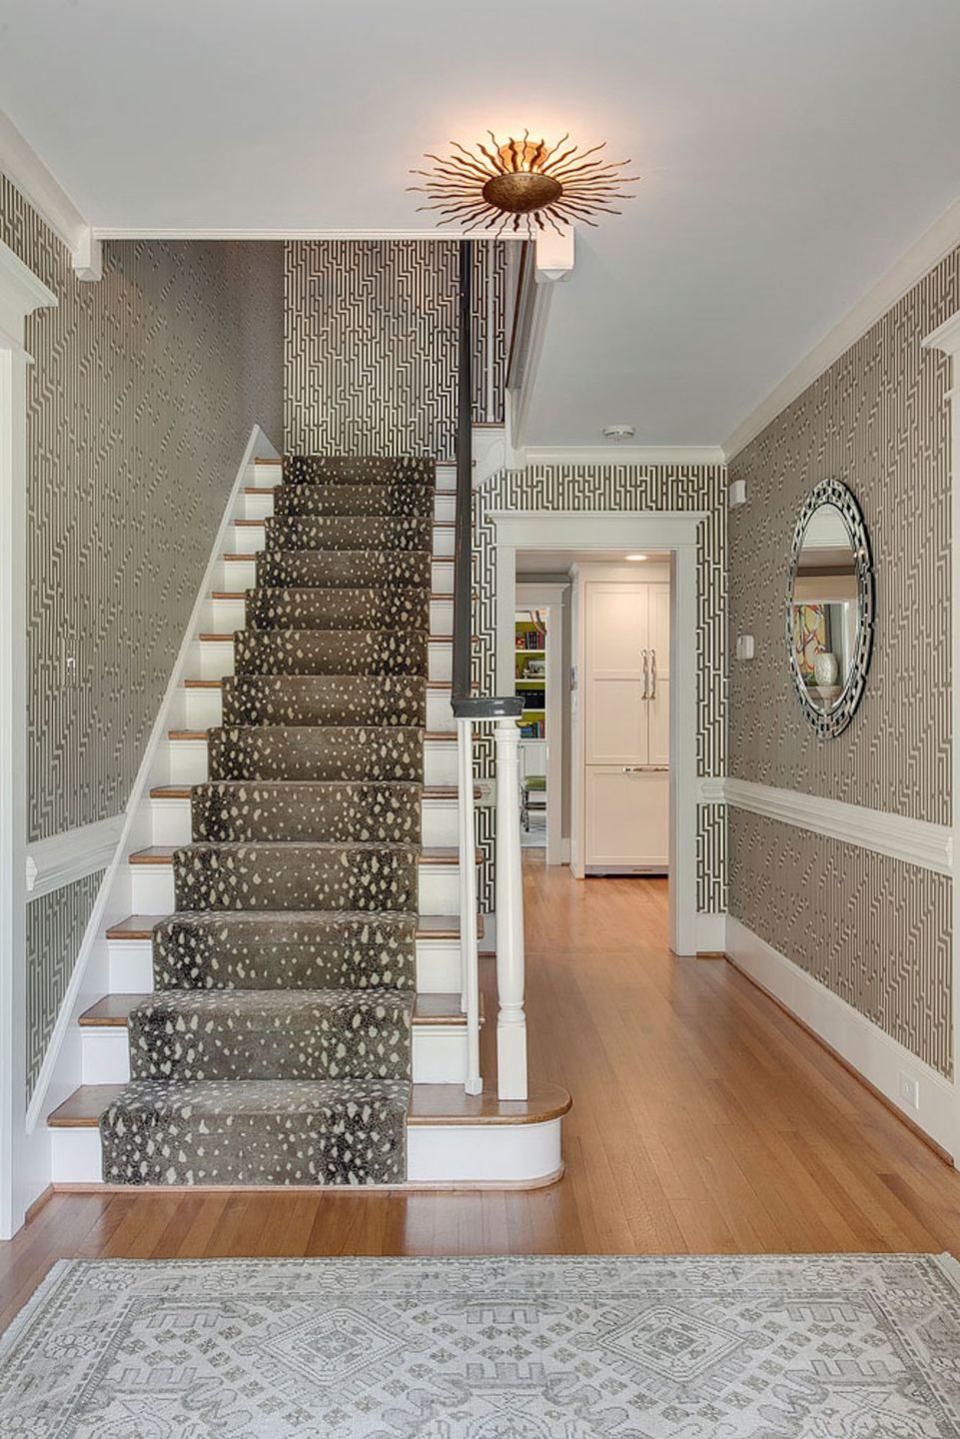 A chic patterned stairwell